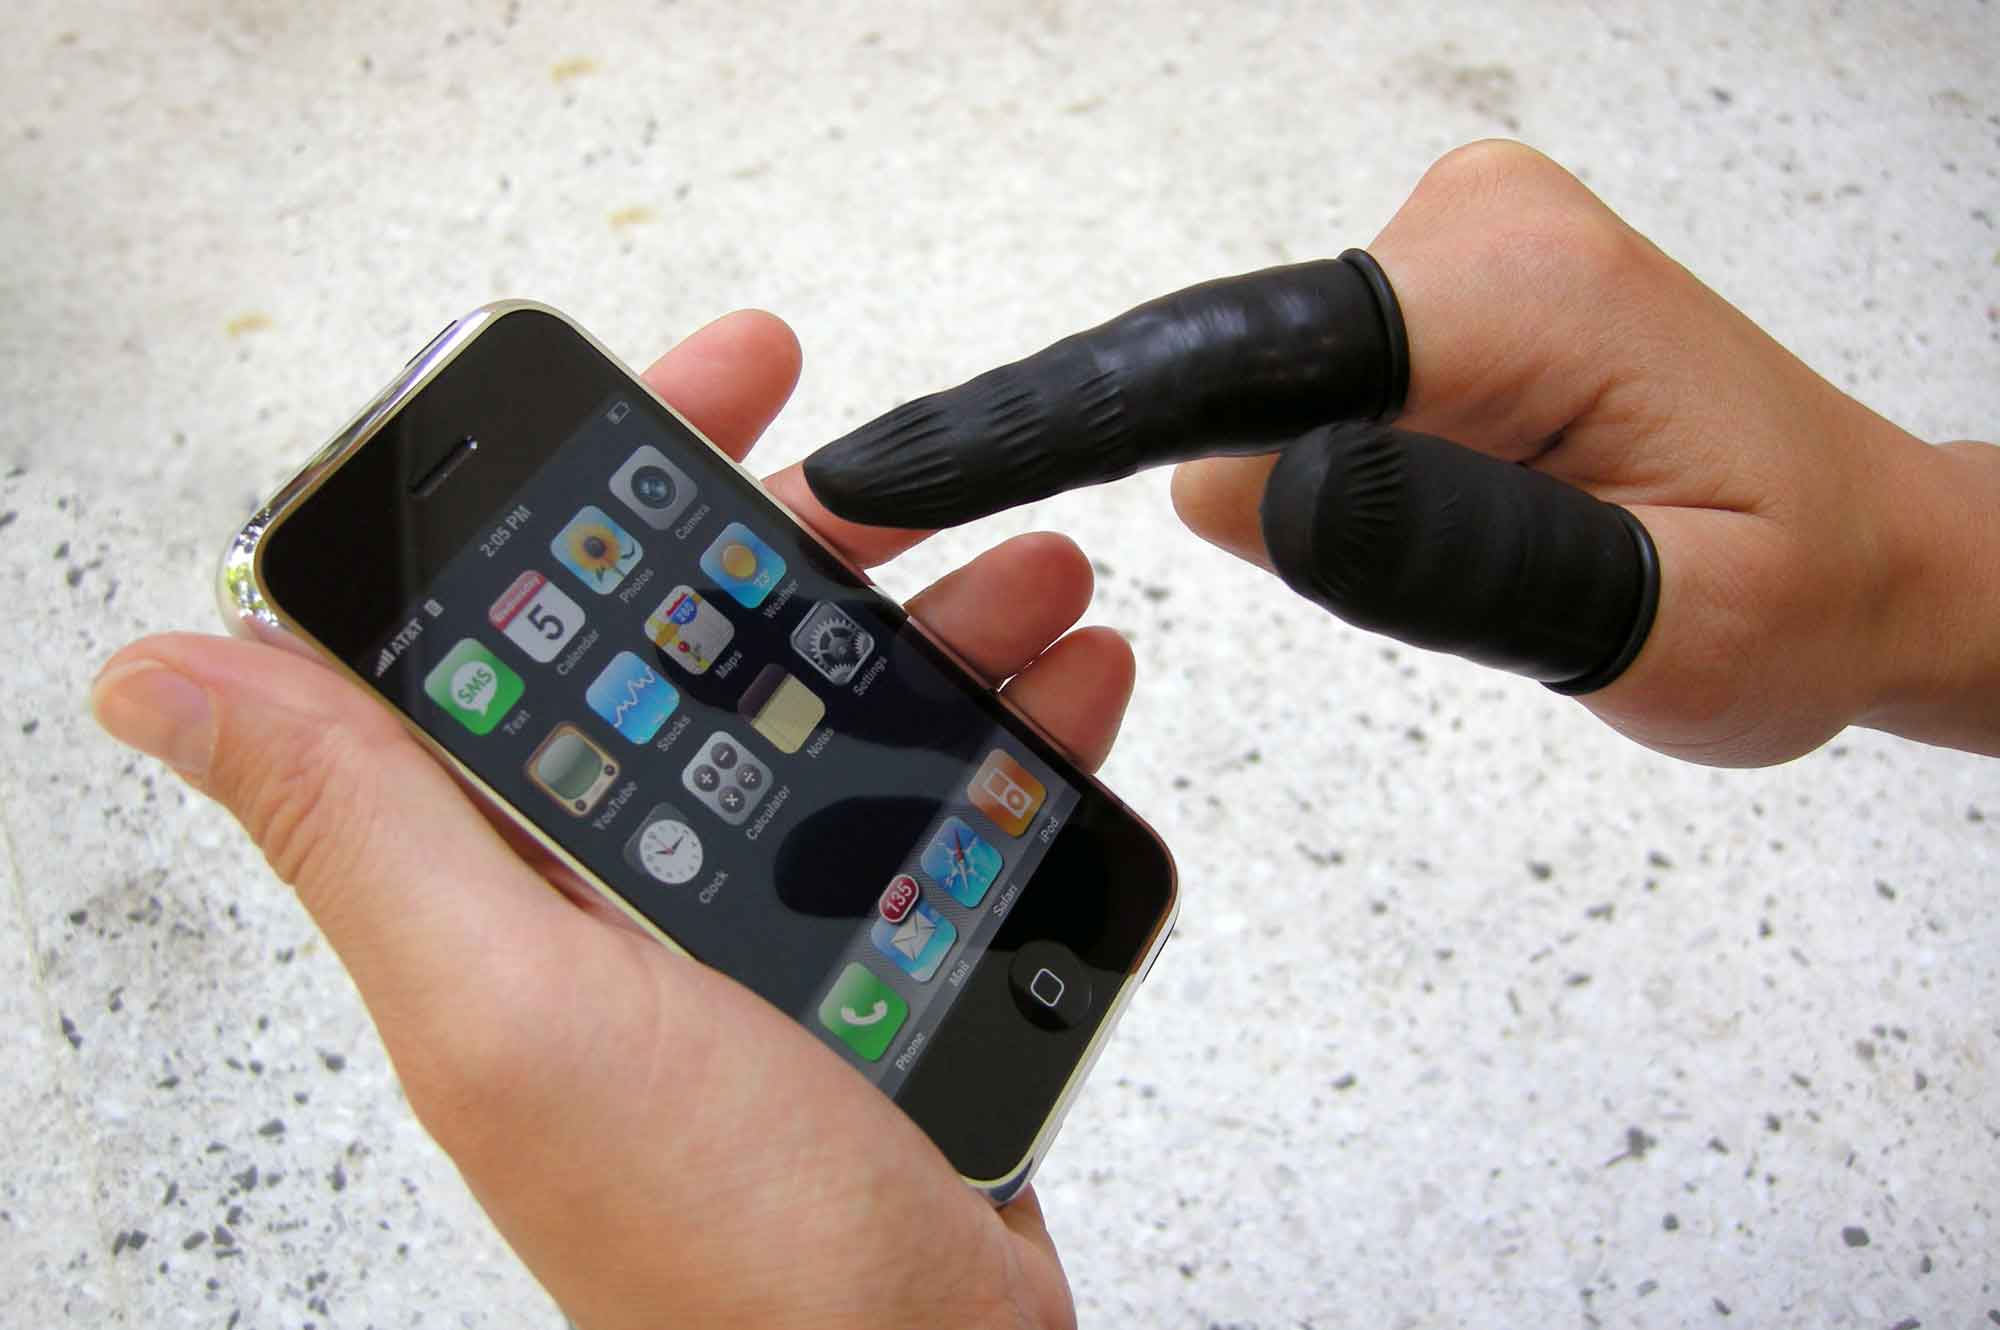 Phone Fingers - The Worst iPhone Accessory Ever